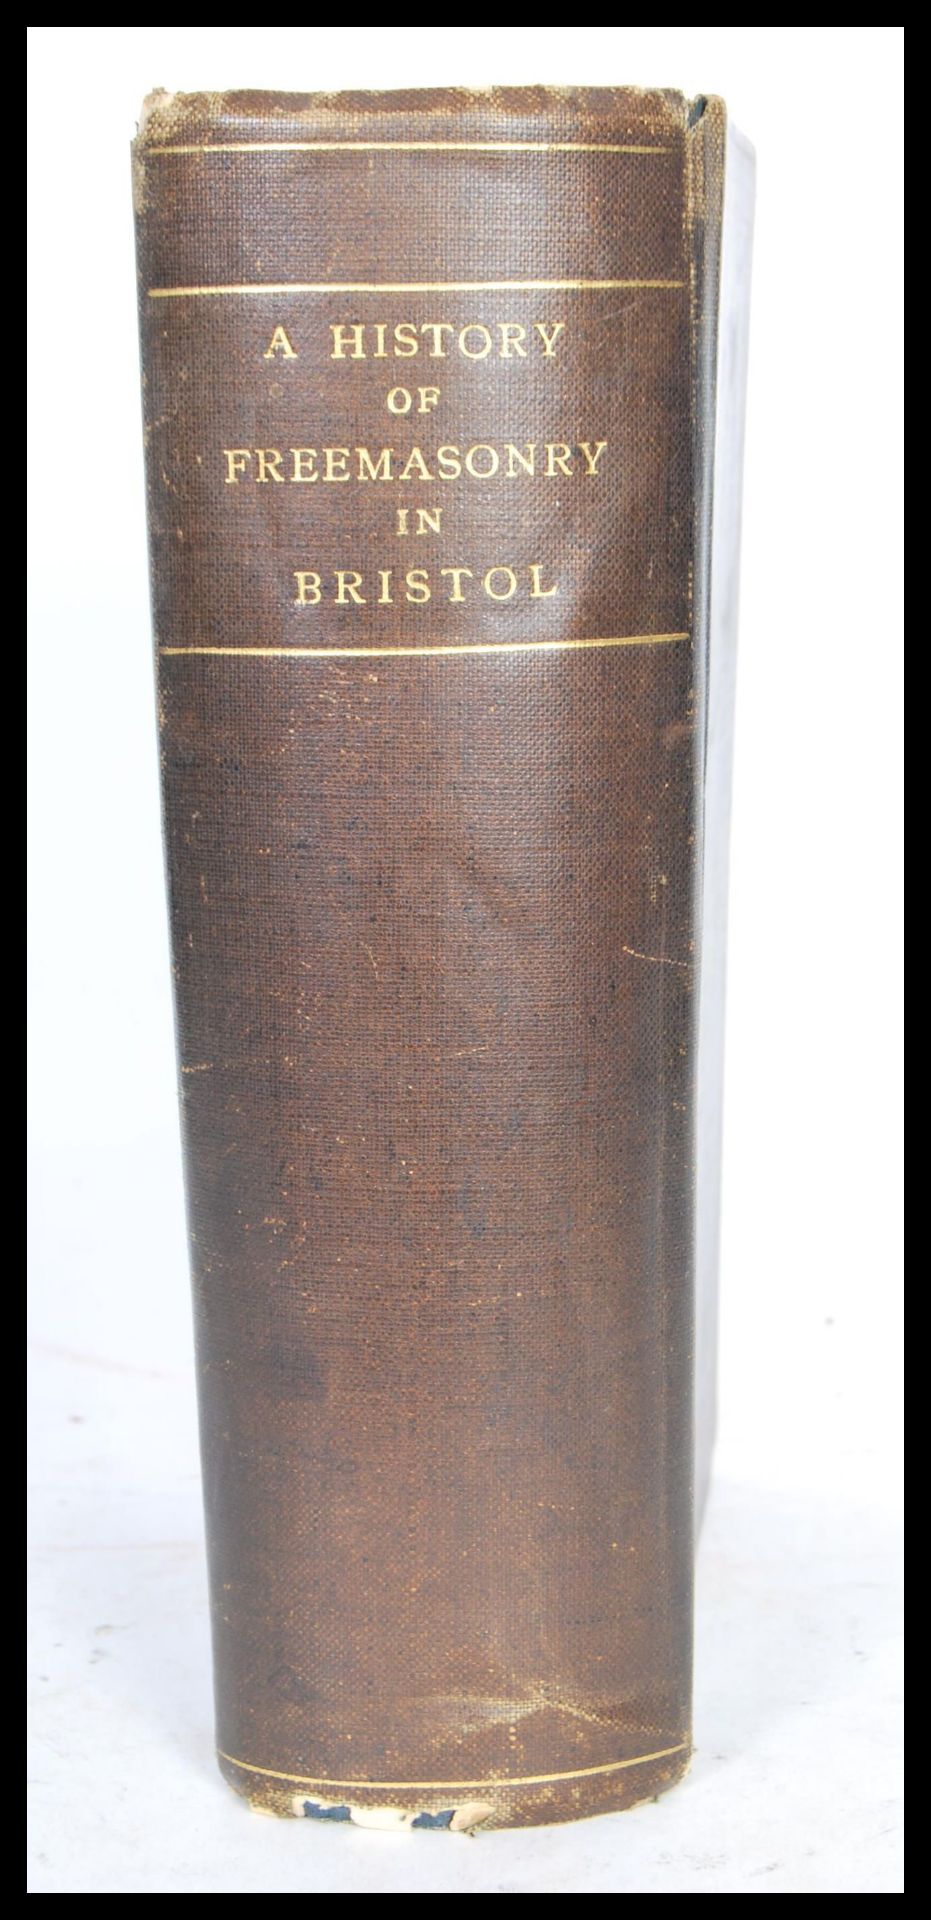 Local Interest - ' A History of Freemasonry in Bristol ' by Arthur Cecil Powell and Joseph Littleton